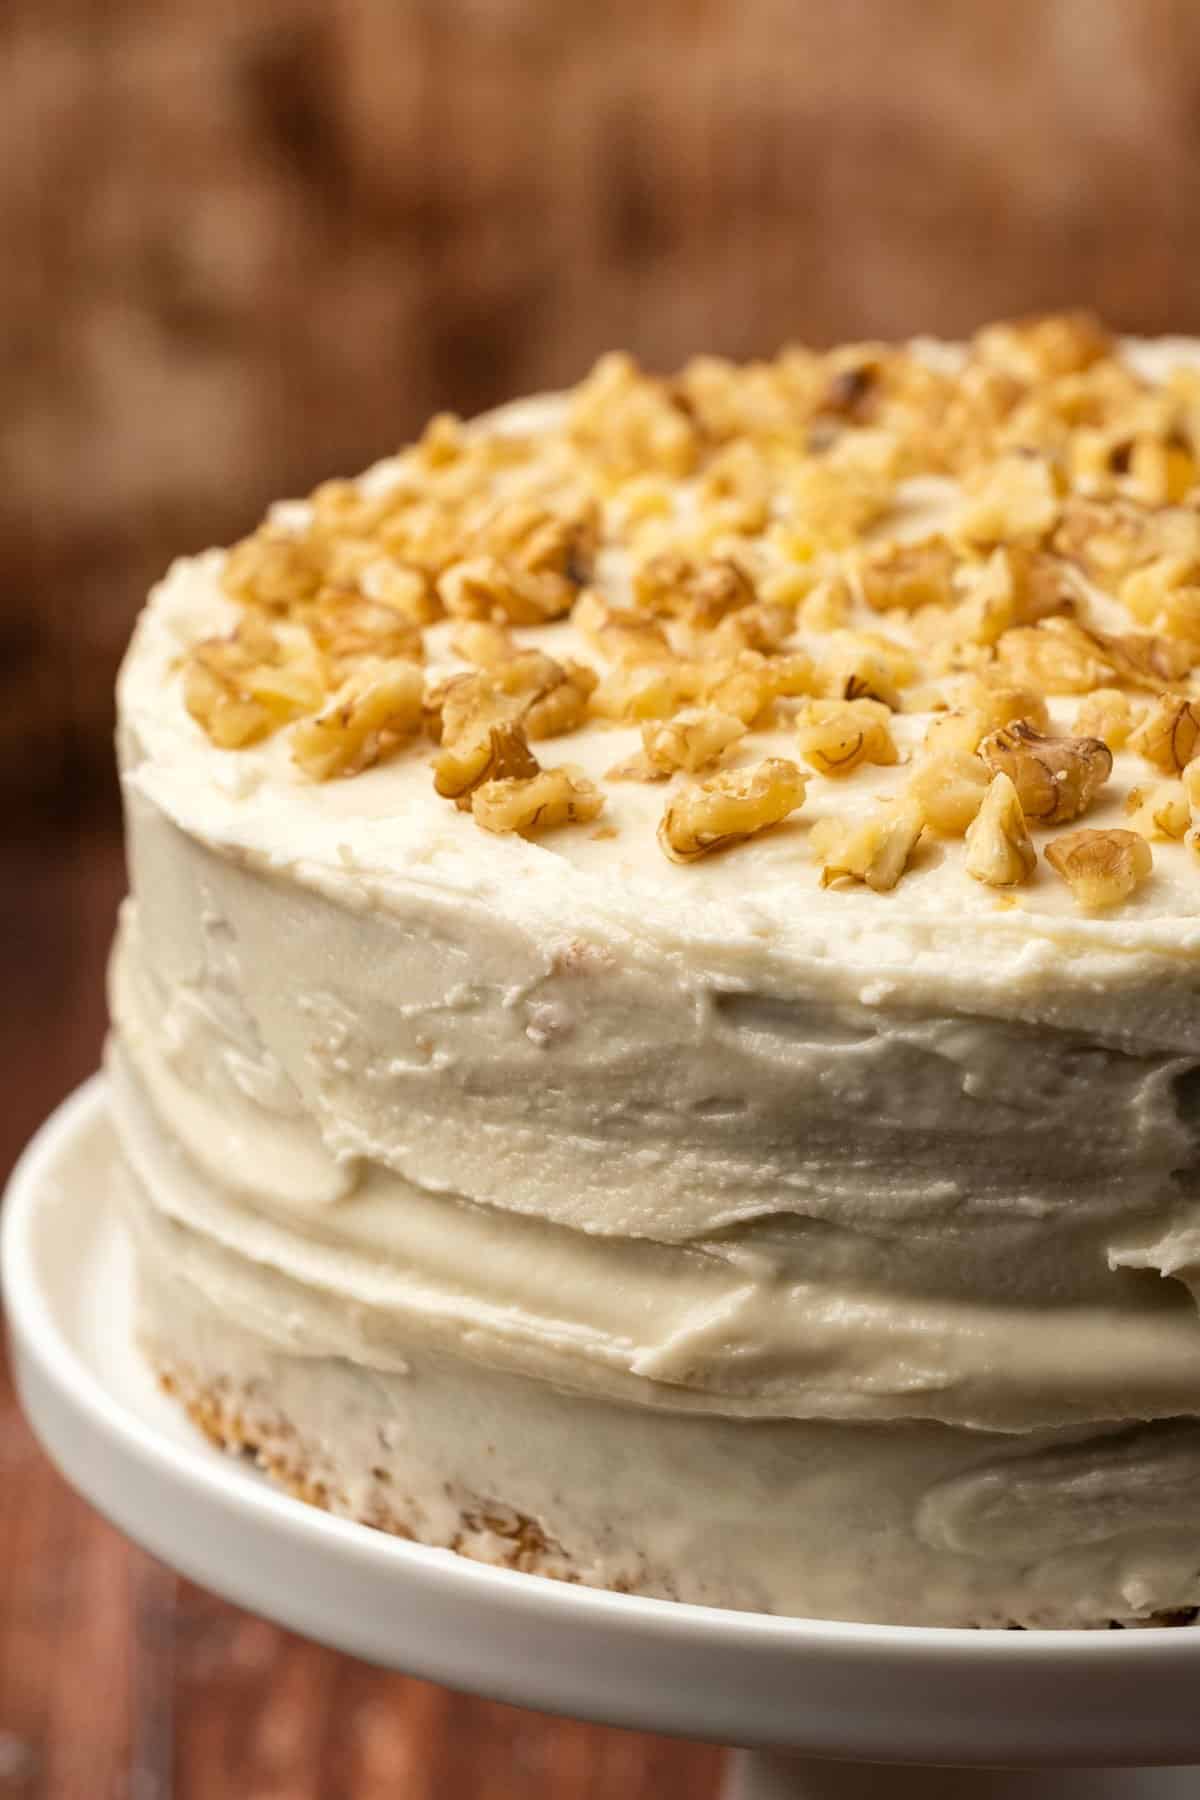 Vegan carrot cake topped with walnuts on a white cake stand.